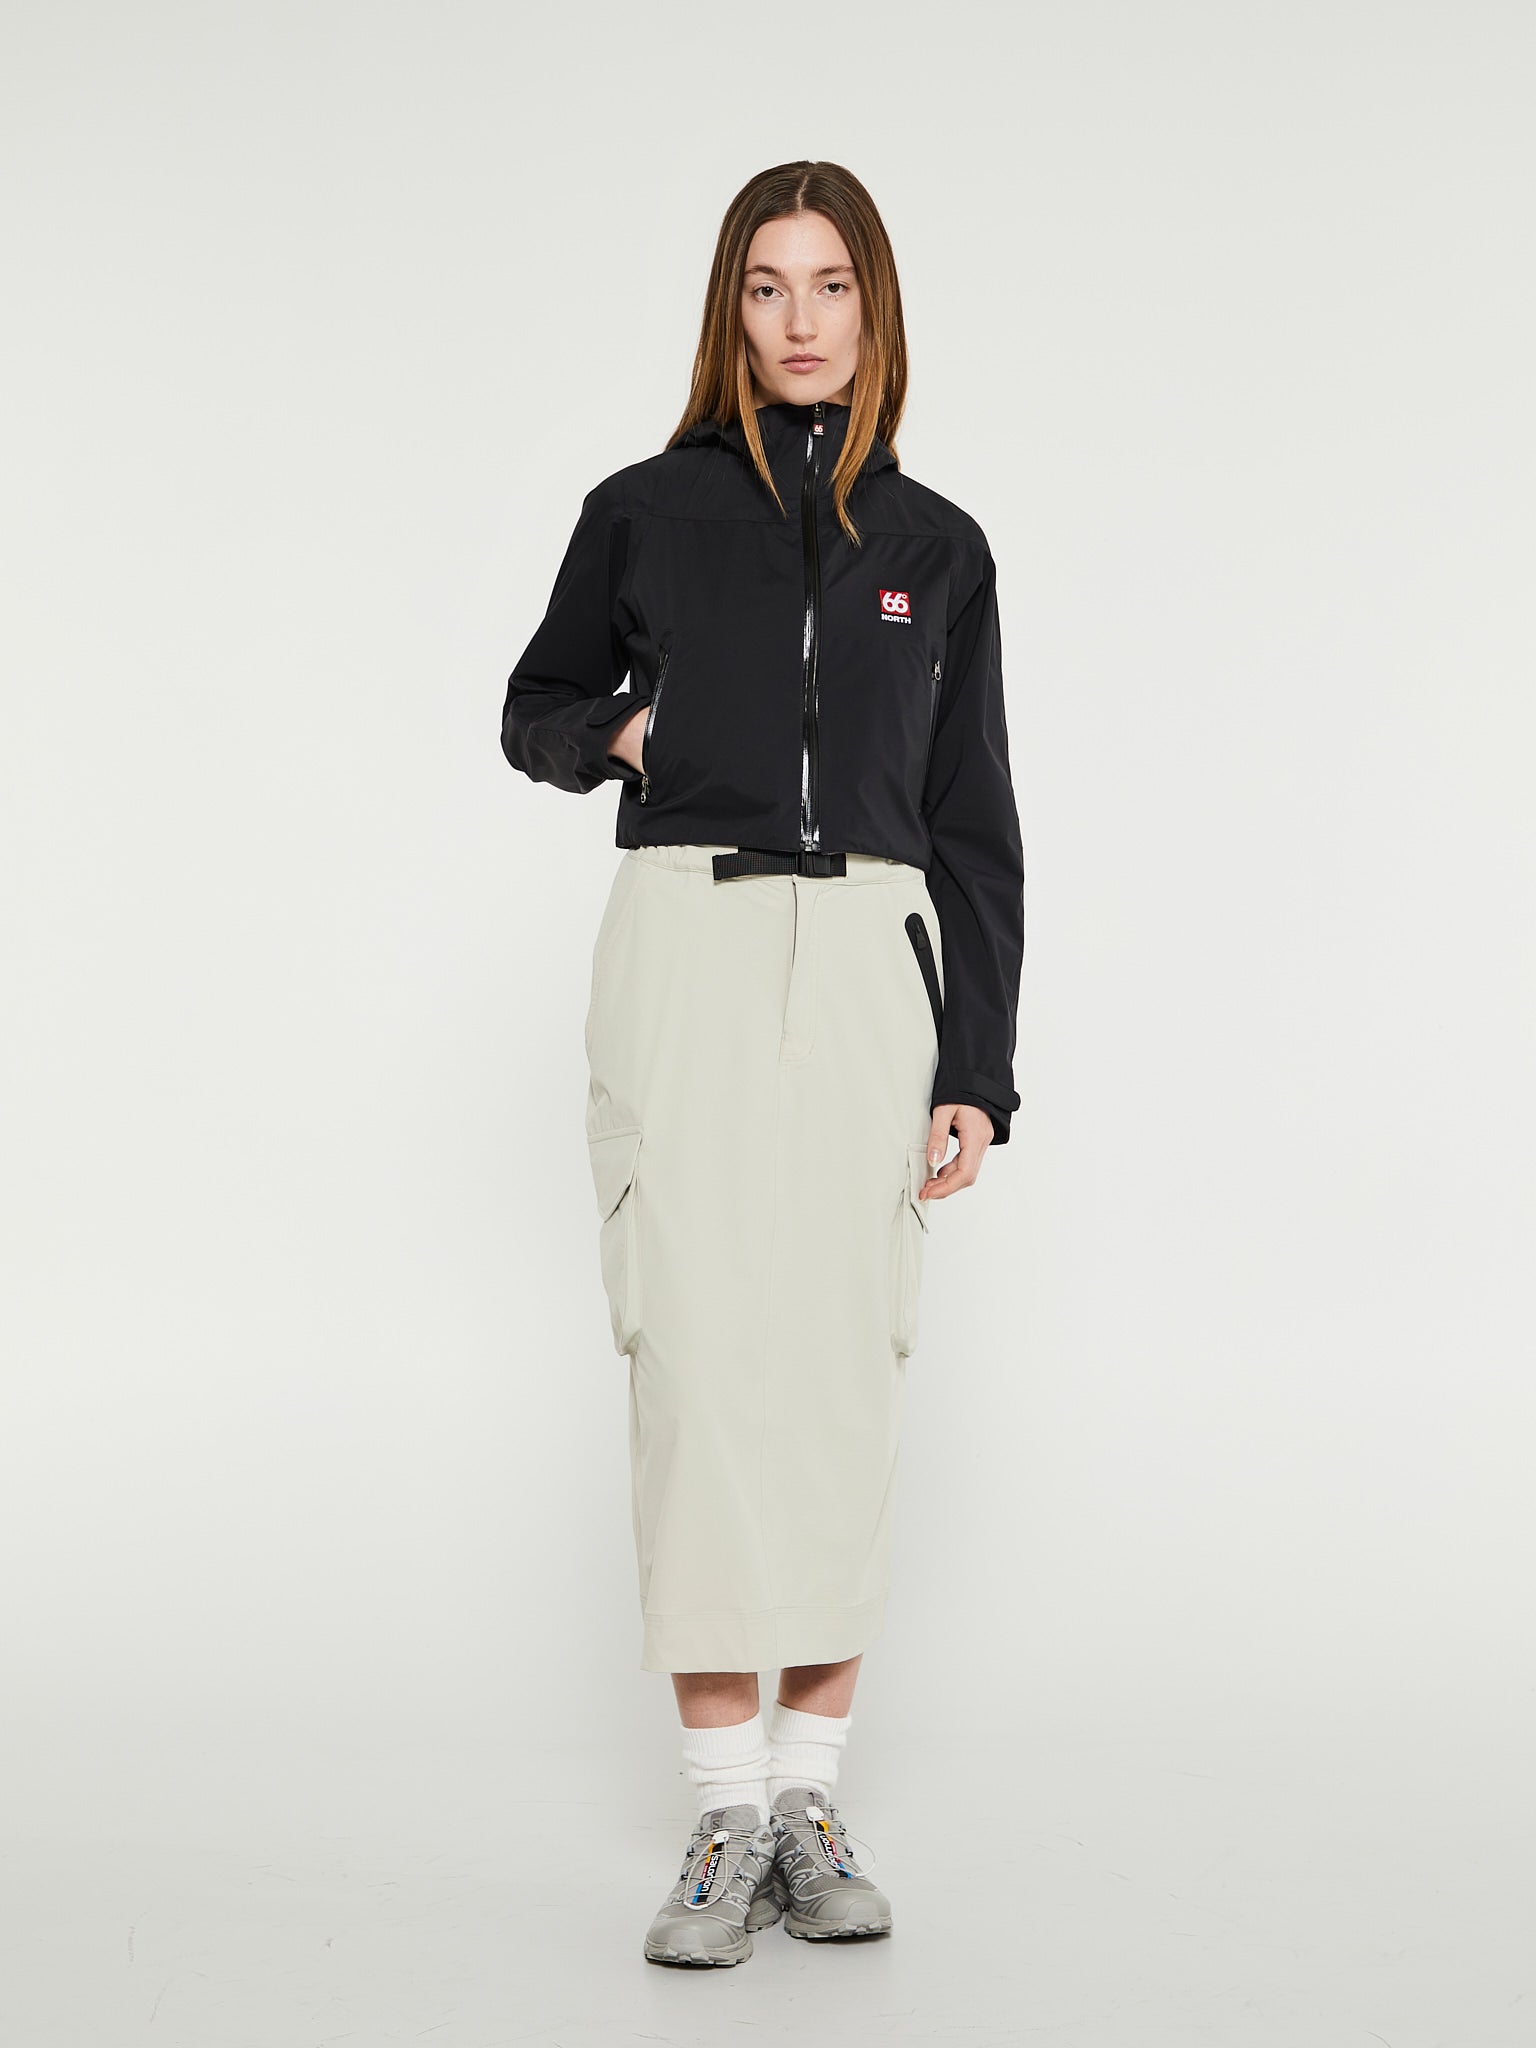 Snaefell W Cropped Neoshell Jacket in Black